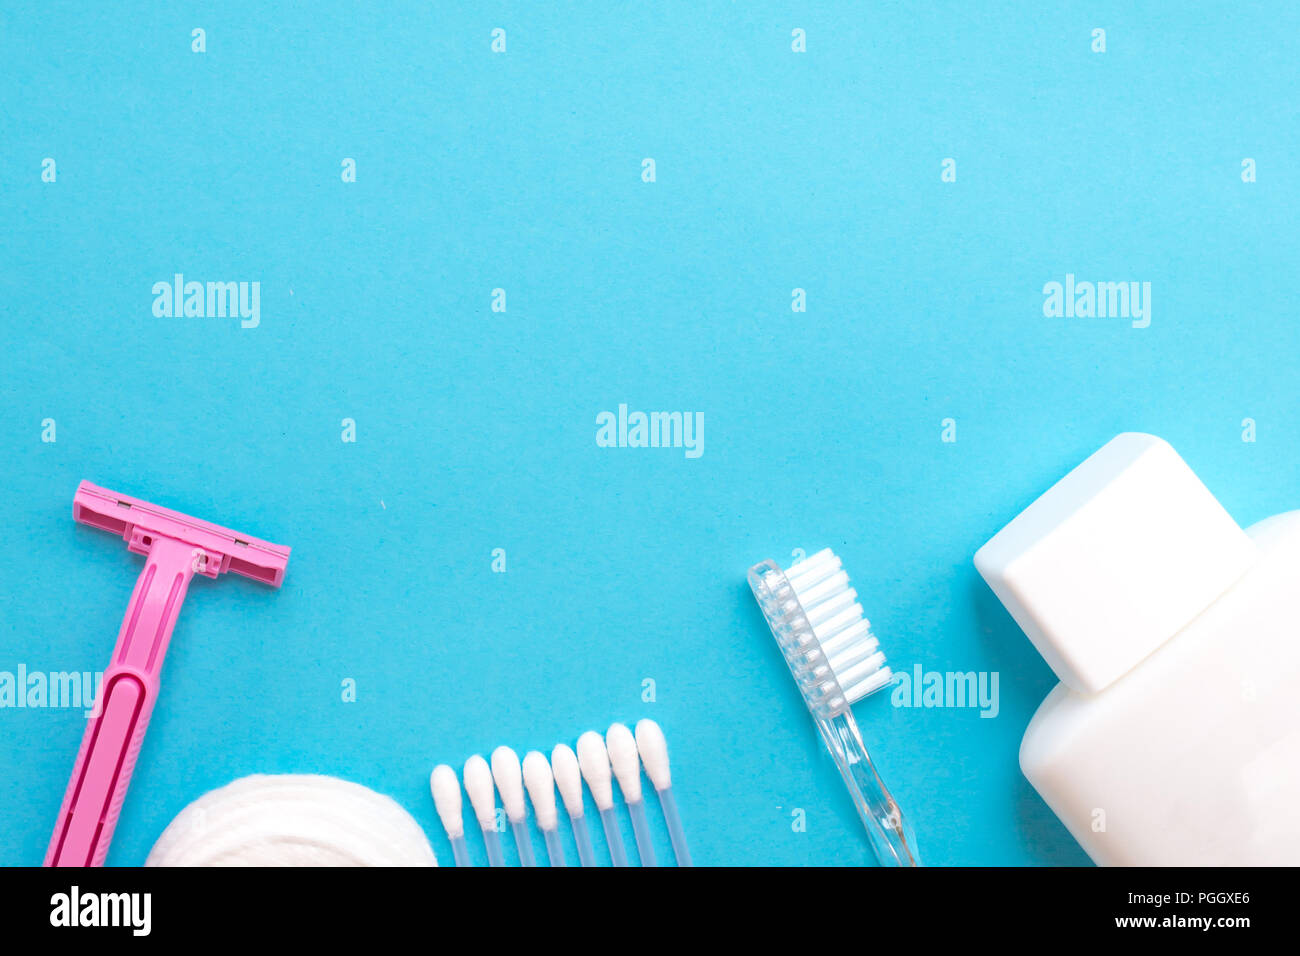 top view personal care products. white bottle, pink razor, ear sticks, cotton pads, toothbrush on blue background. copy space Stock Photo